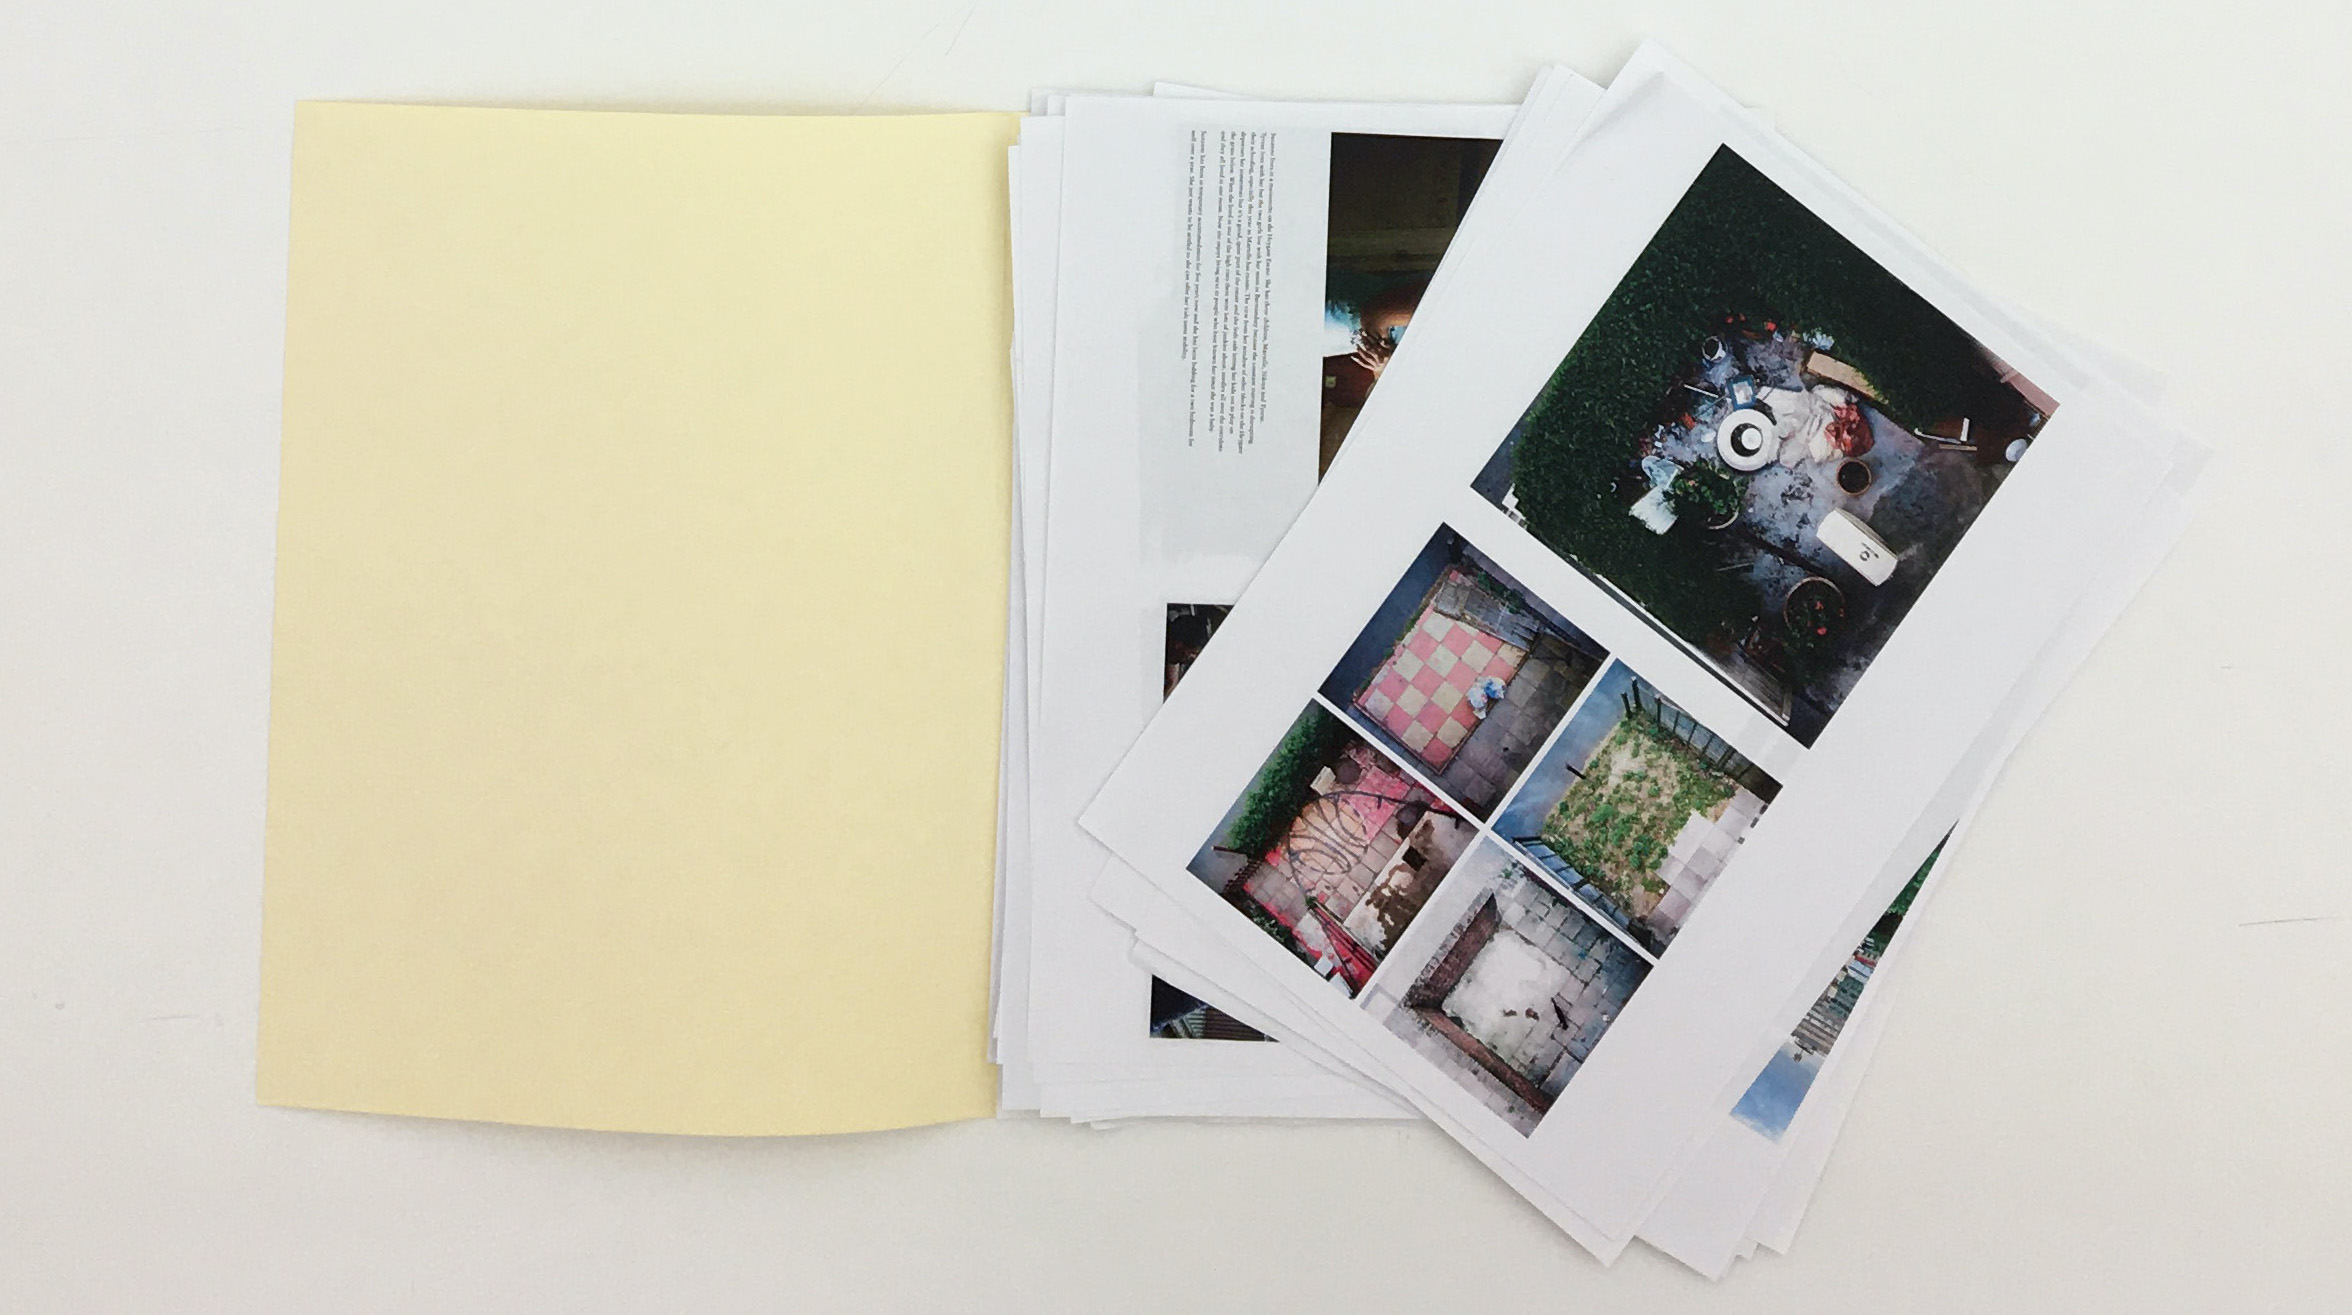 Sheets of paper with images printed on inside open folder